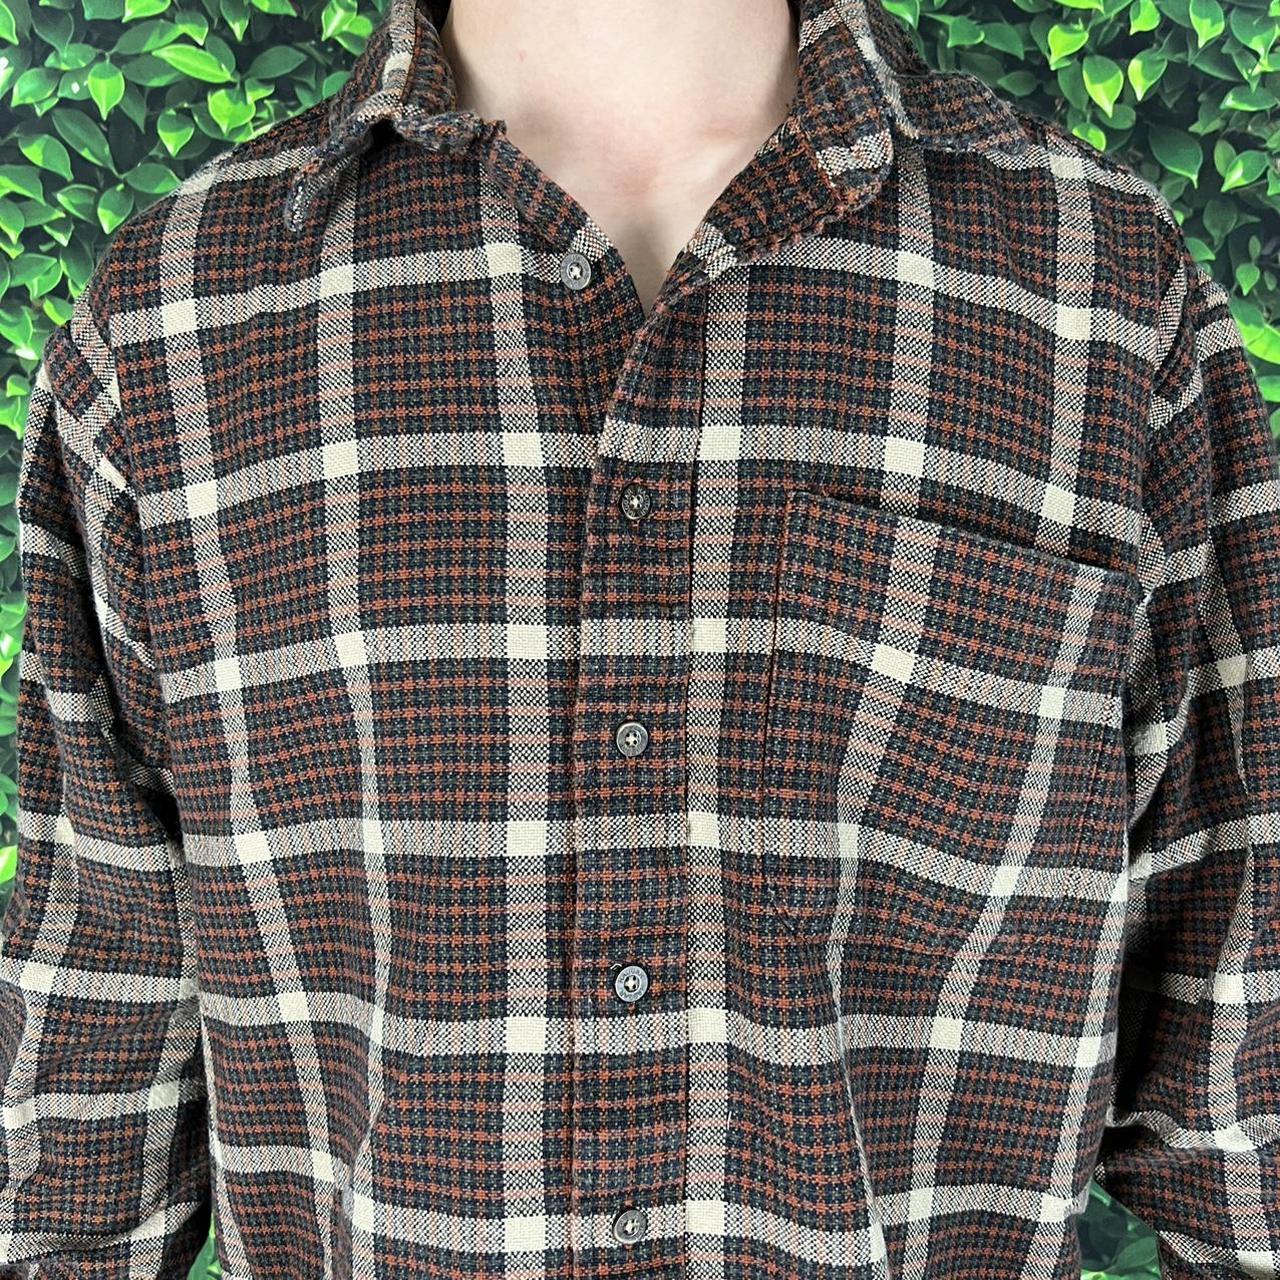 Product Image 3 - Earth tone skater dad flannel